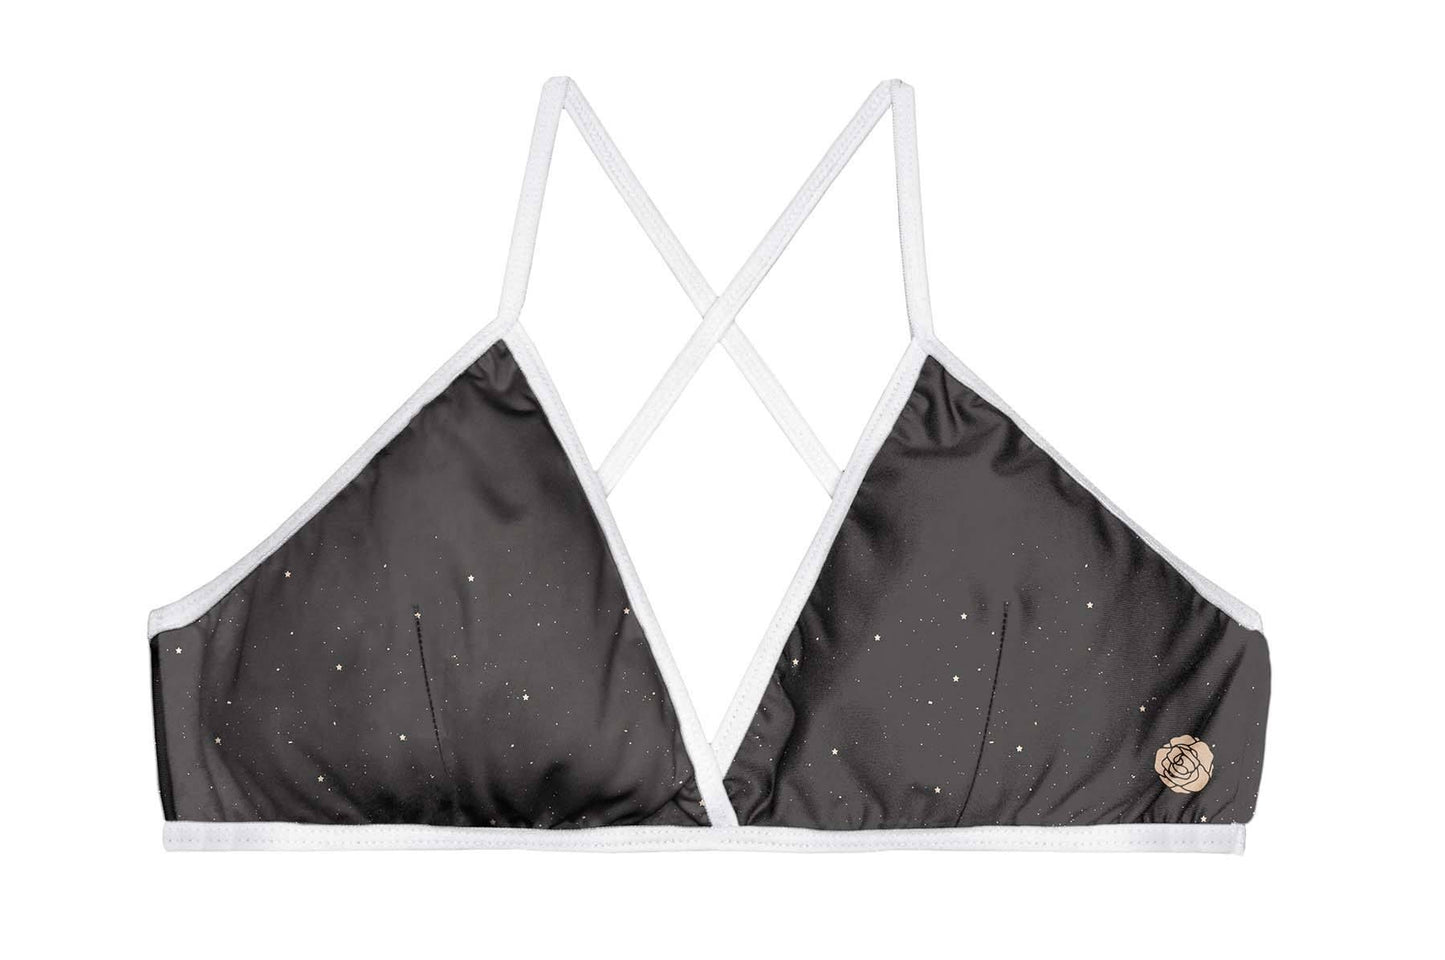 Femme qui porte la bralette recyclée de Rose Boreal./ Women wearing the Upcycling Bralette from Rose Boreal. -Magic Crystal Slate